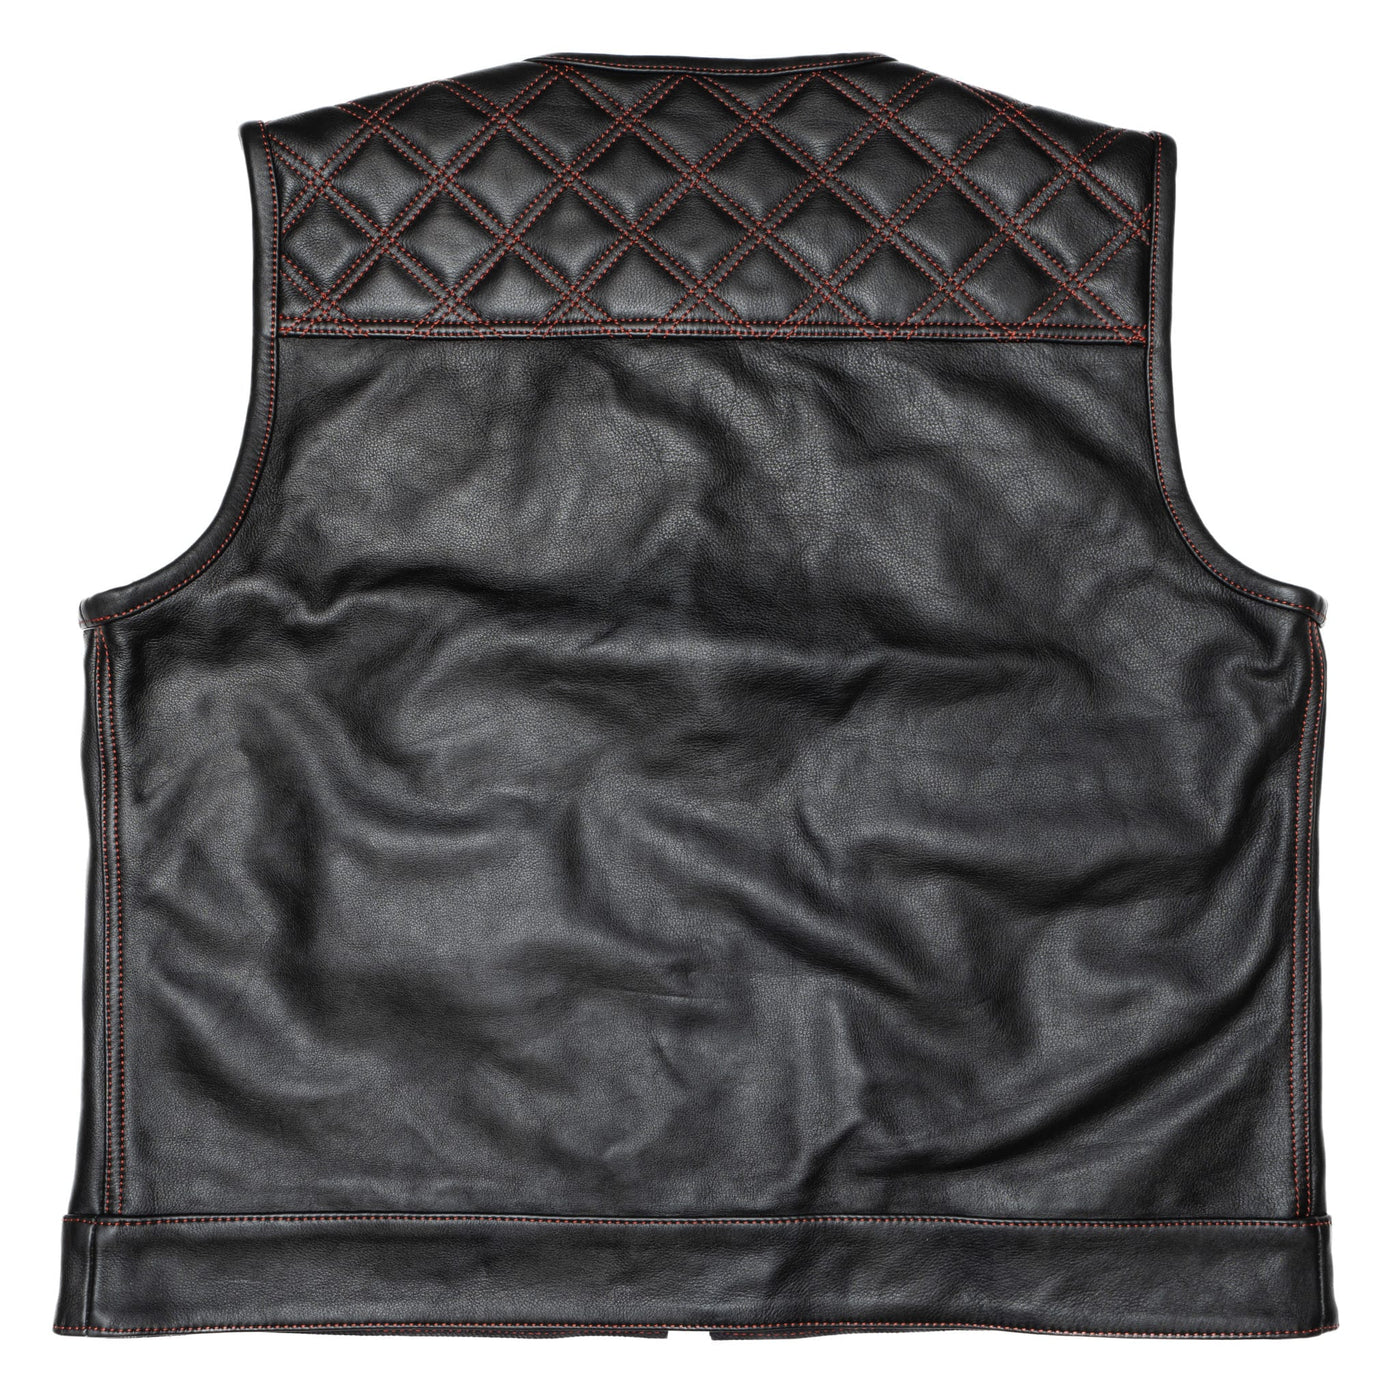 Lords x Freedom Is A Full Tank Moto Vest - Black Leather